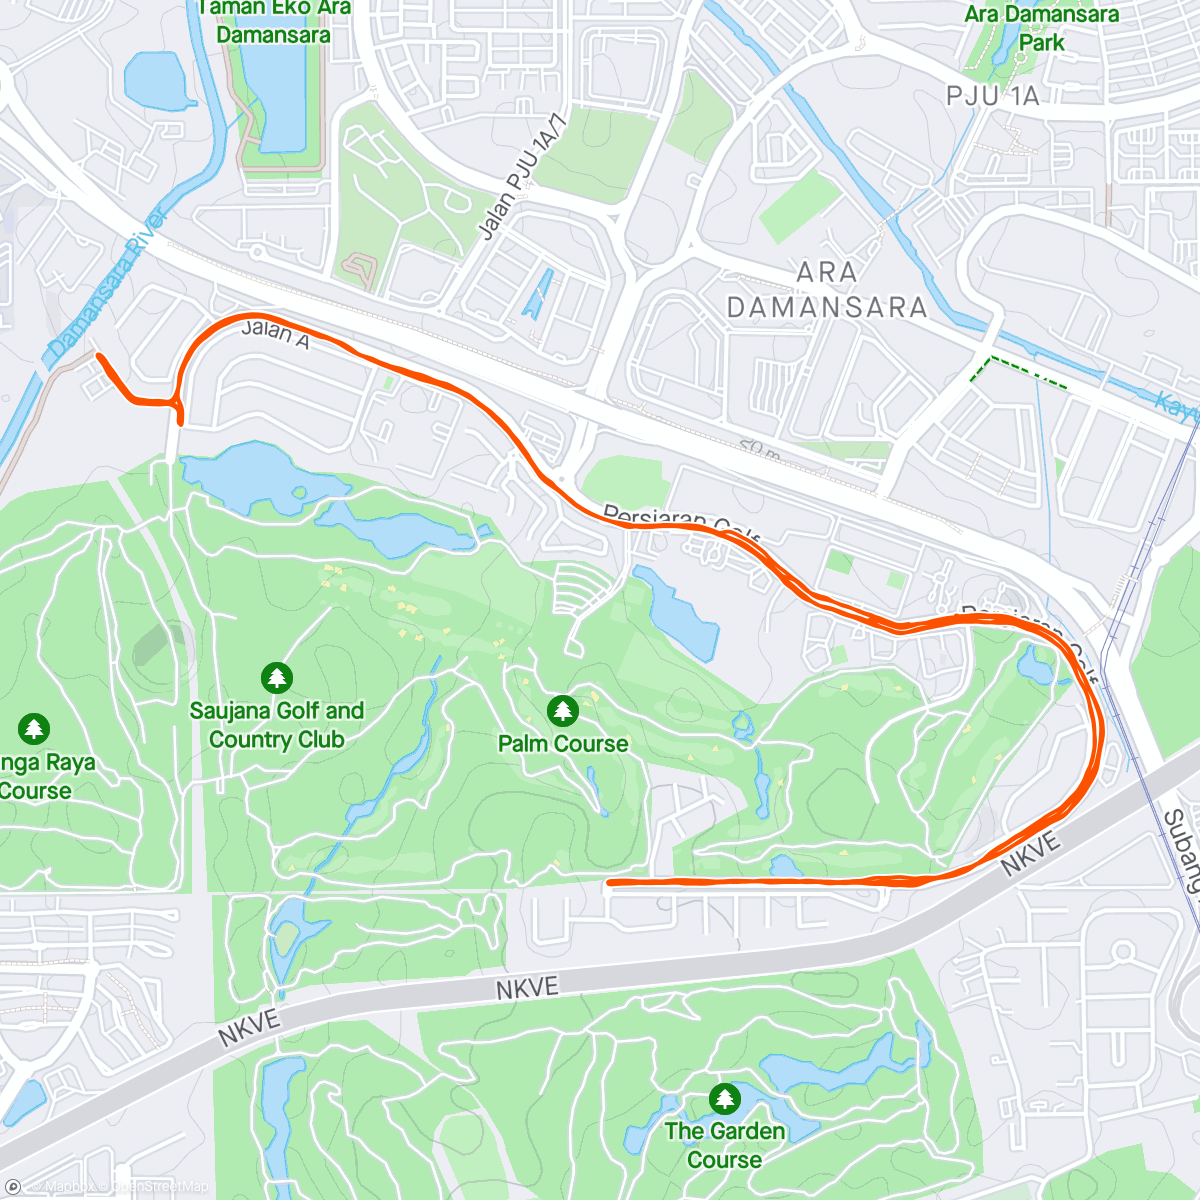 「🌹🏃MWM by WR LSD + Brothers LSD Run 🐌🌹. Work till late, flu & cough 😷, not fit... Brothers LSD Run, sudden last minute change...last try Recovery Run follow Pacer 7 Min Group. TQ 🫰」活動的地圖